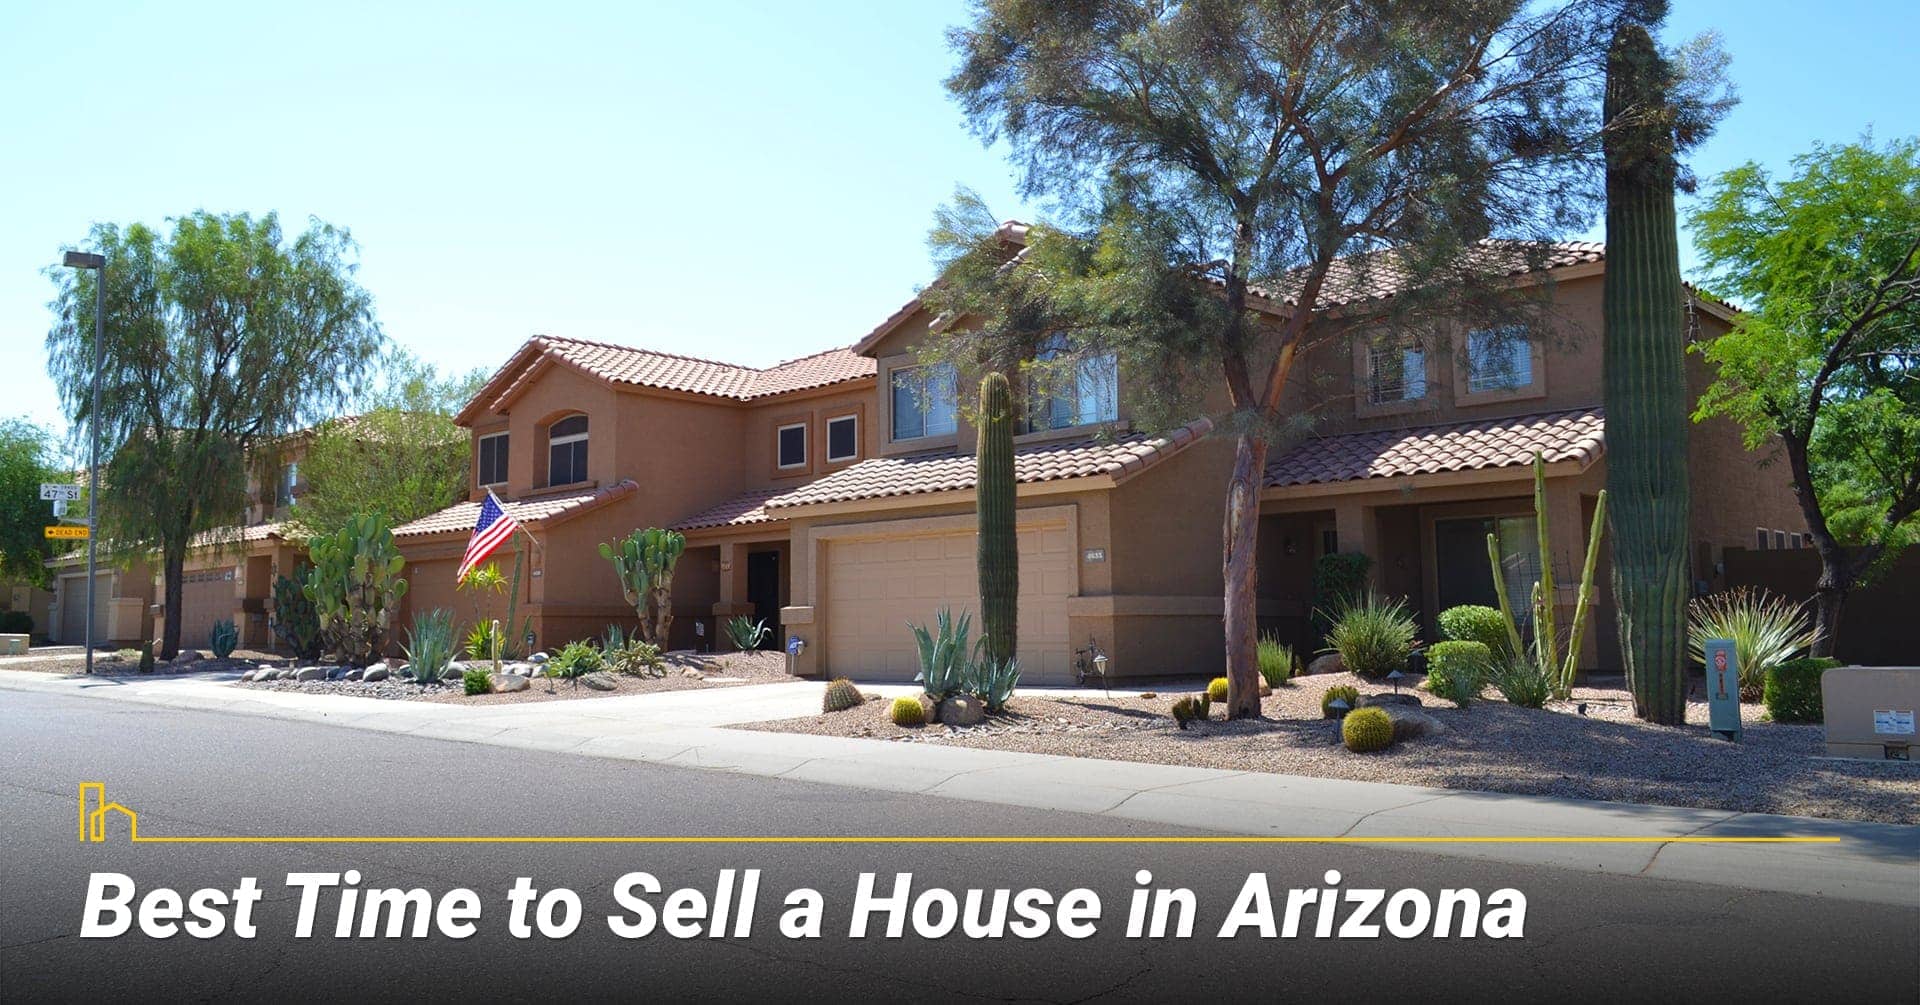 Best Time to Sell a House in Arizona, Spring is the best time to sell a house in Arizona